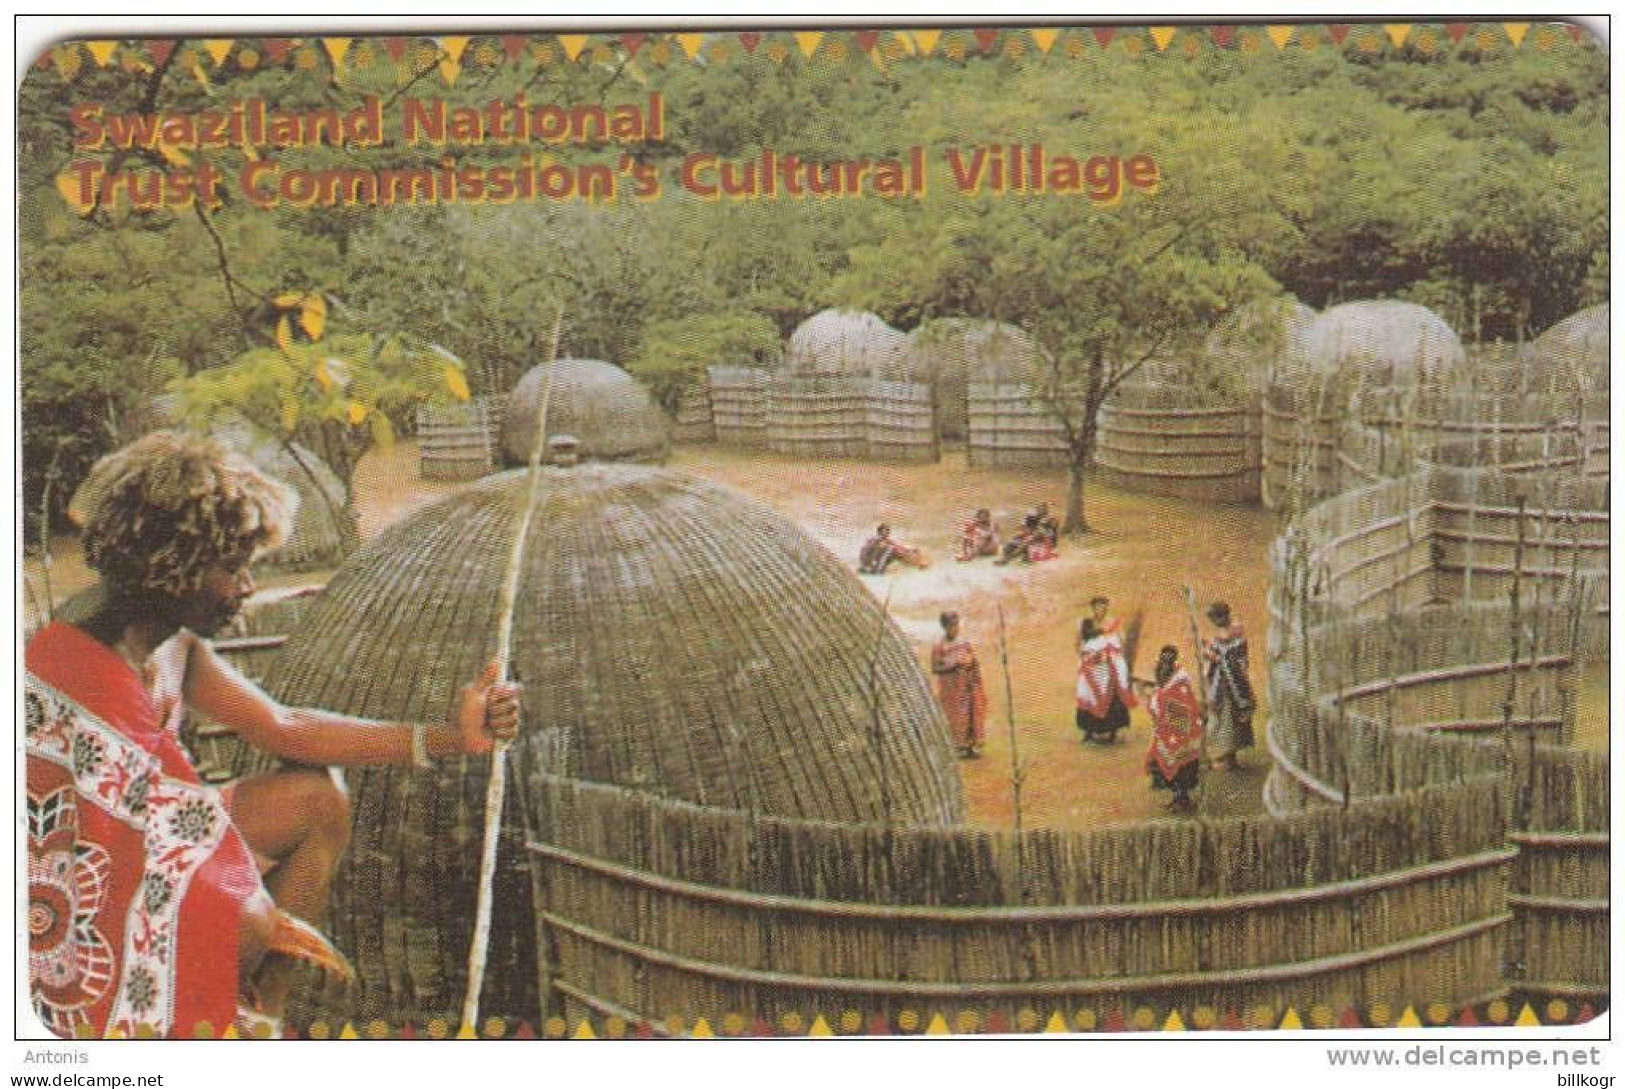 SWAZILAND(chip) - Cultural Village, Flag, Exp.date 03/01, Used - Swaziland